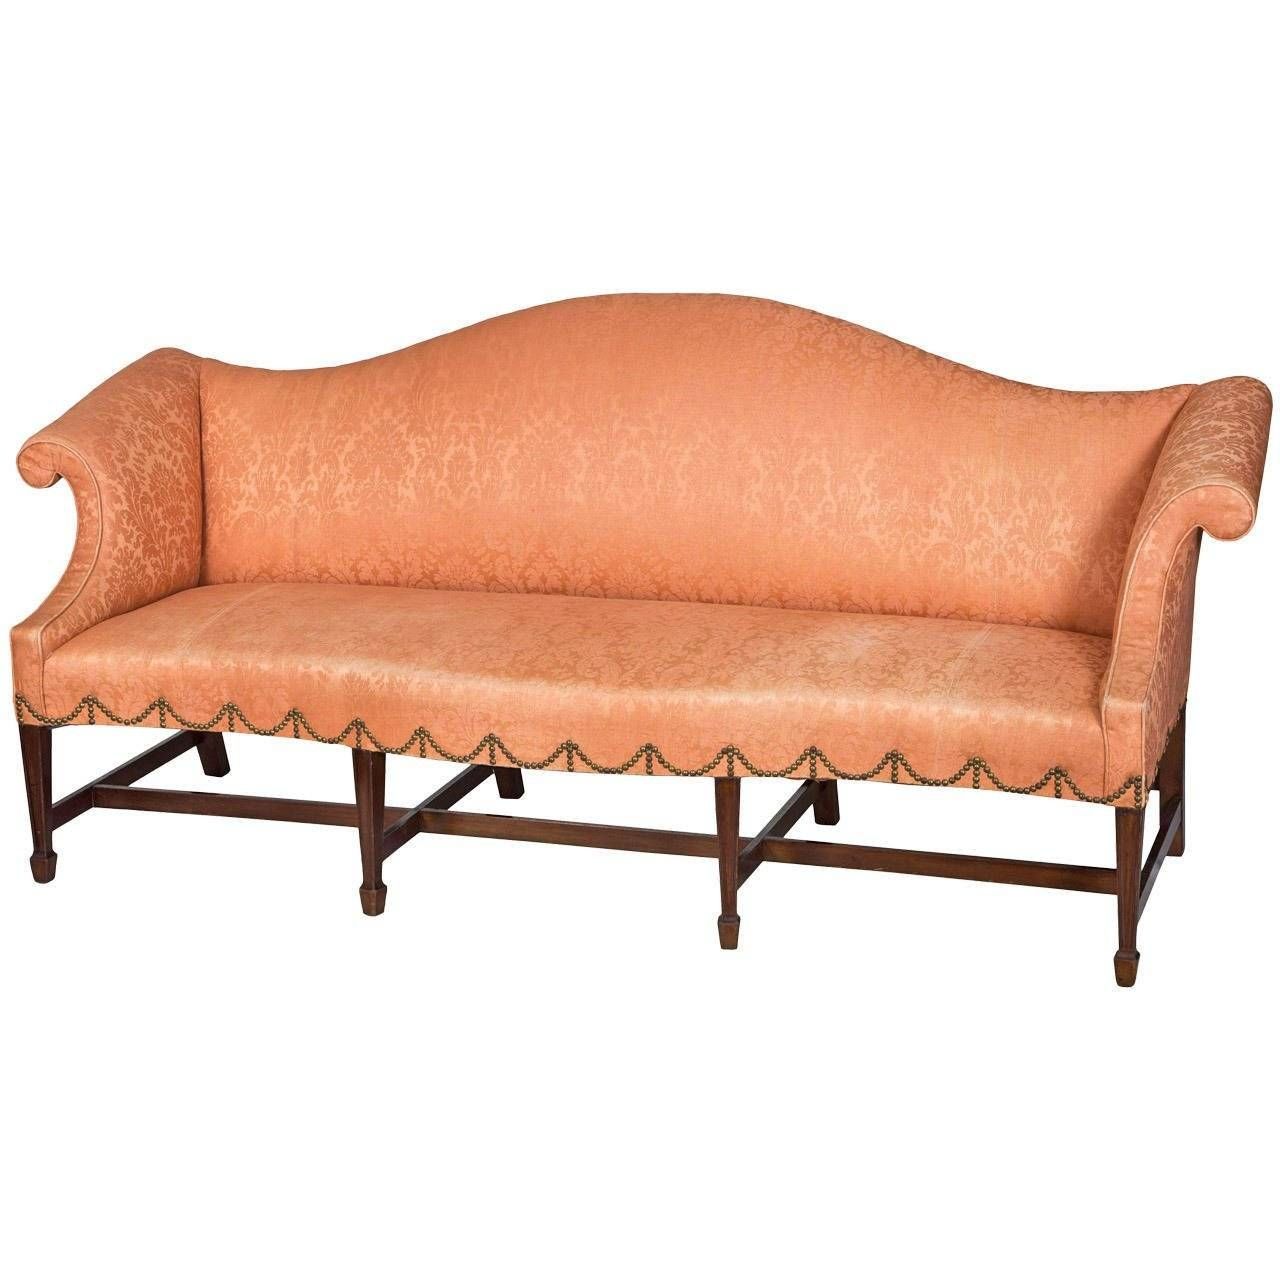 Mahogany Chippendale Camelback Sofa With Bowed Seat And Spade Feet For Chippendale Camelback Sofas (View 7 of 15)